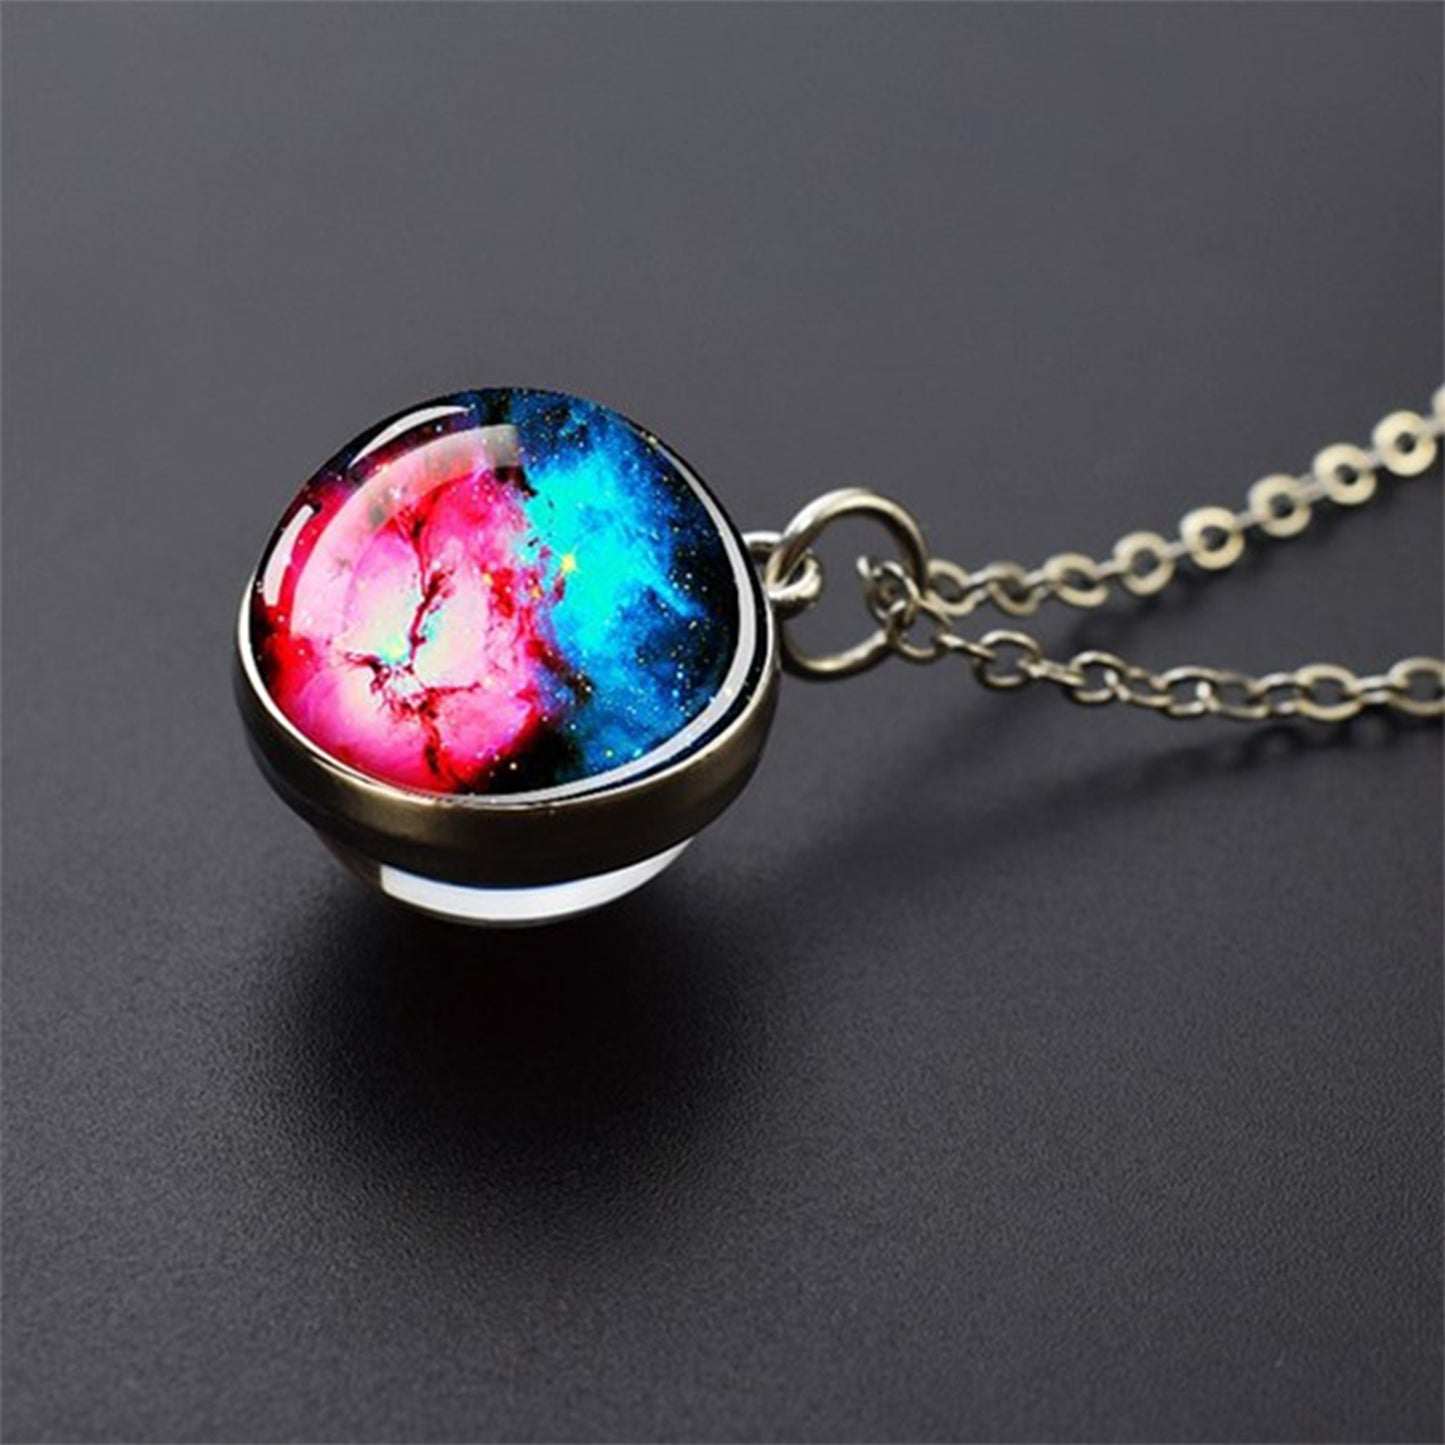 Unique Galaxy Nebula Silver Necklace - Universe Jewelry - Double Side Glass Ball Pendent Necklace - Perfect Astronomy Lovers Gift 2